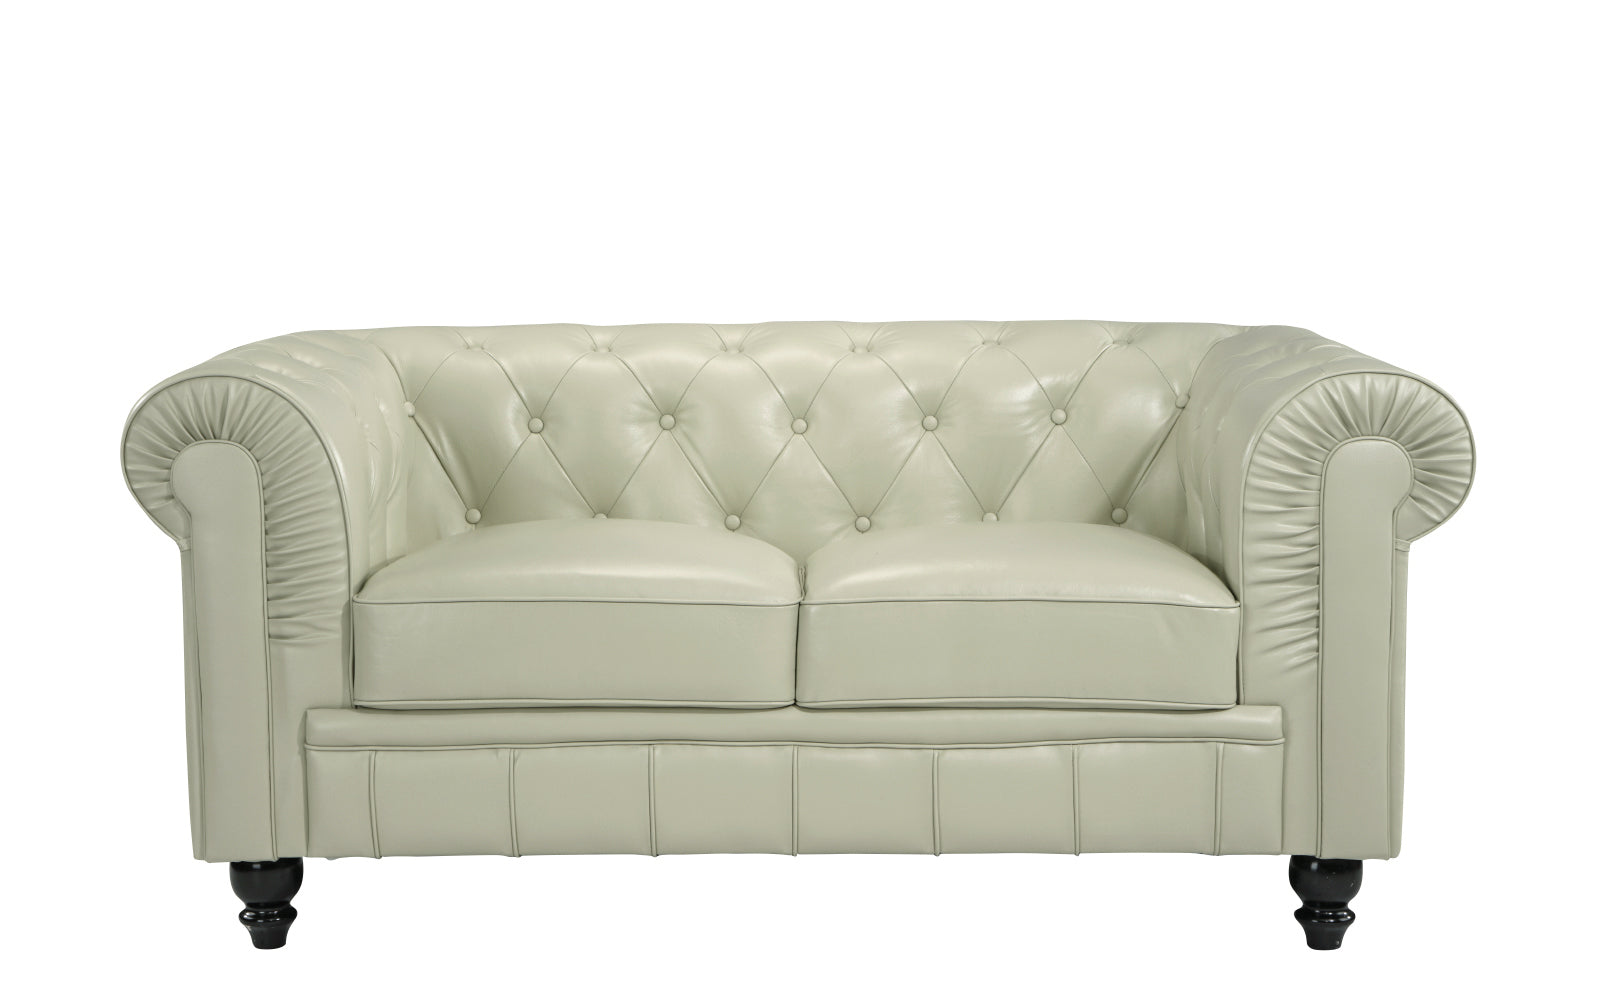 Jude Classic Victorian Leather Match Loveseat